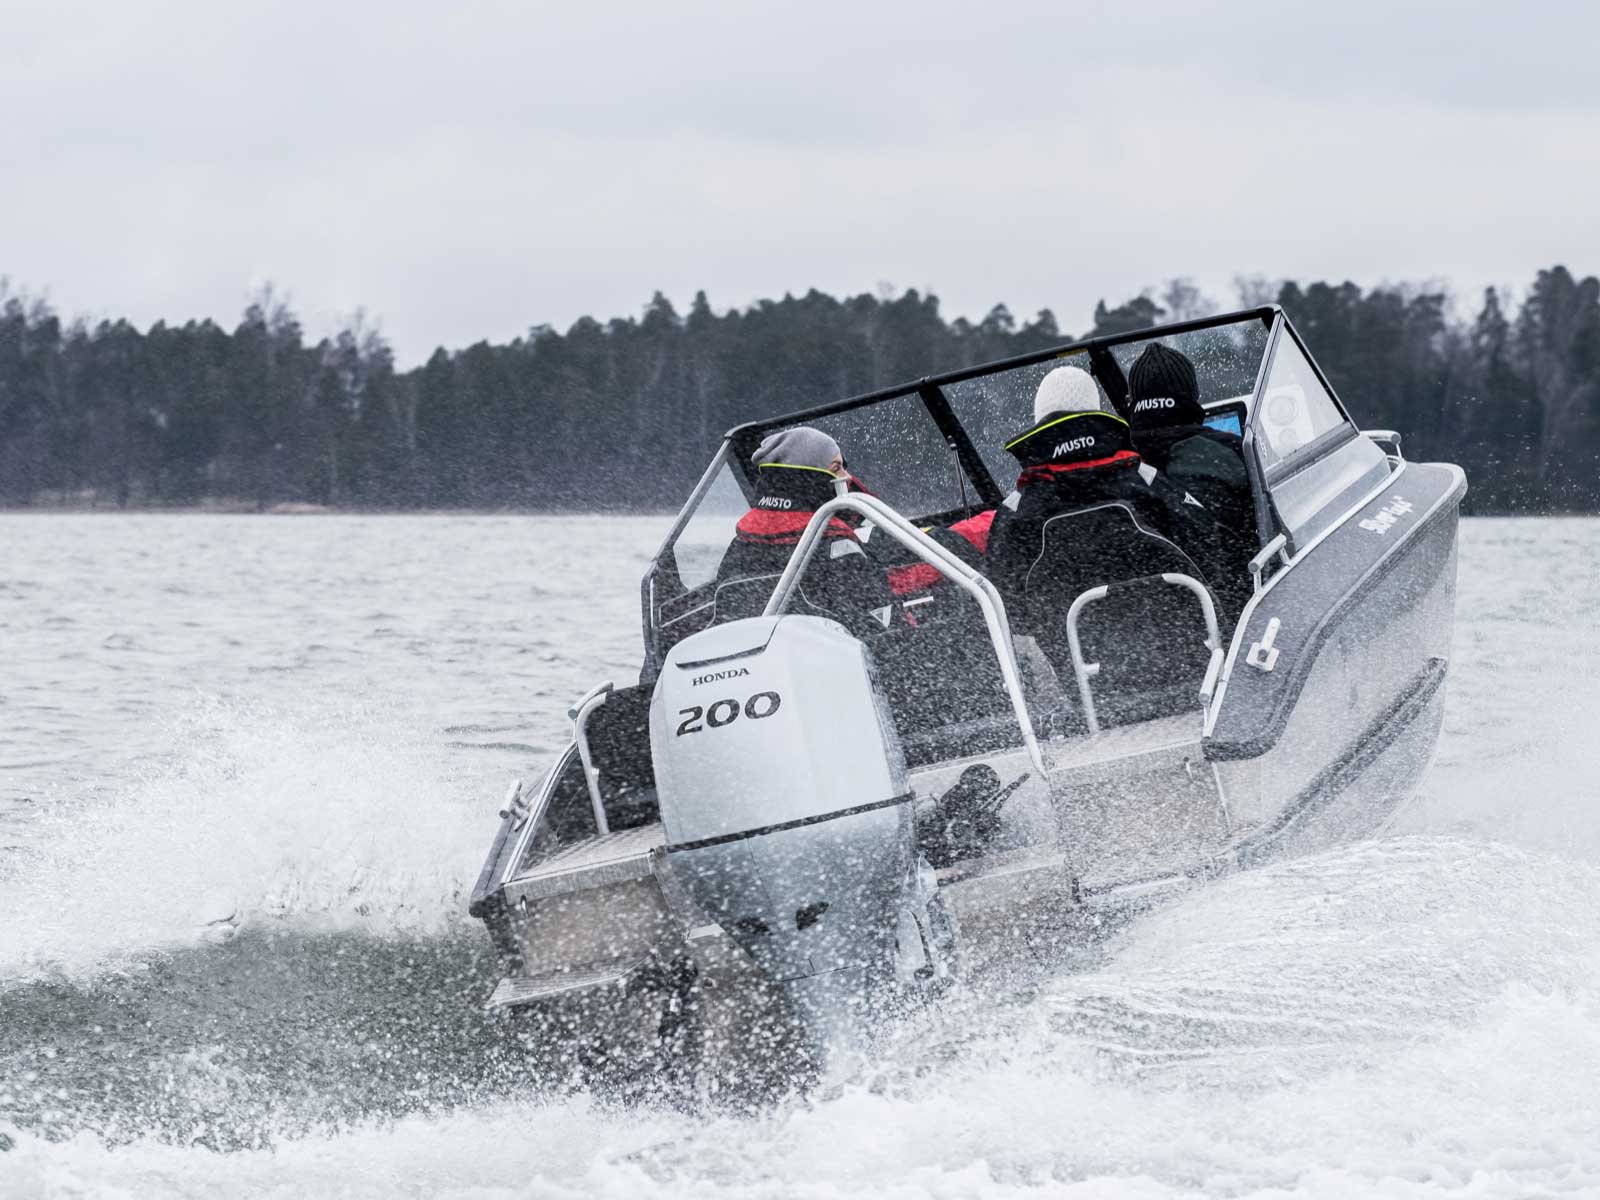 Silver Eagle BRX | Boat Solutions, Utting am Ammersee